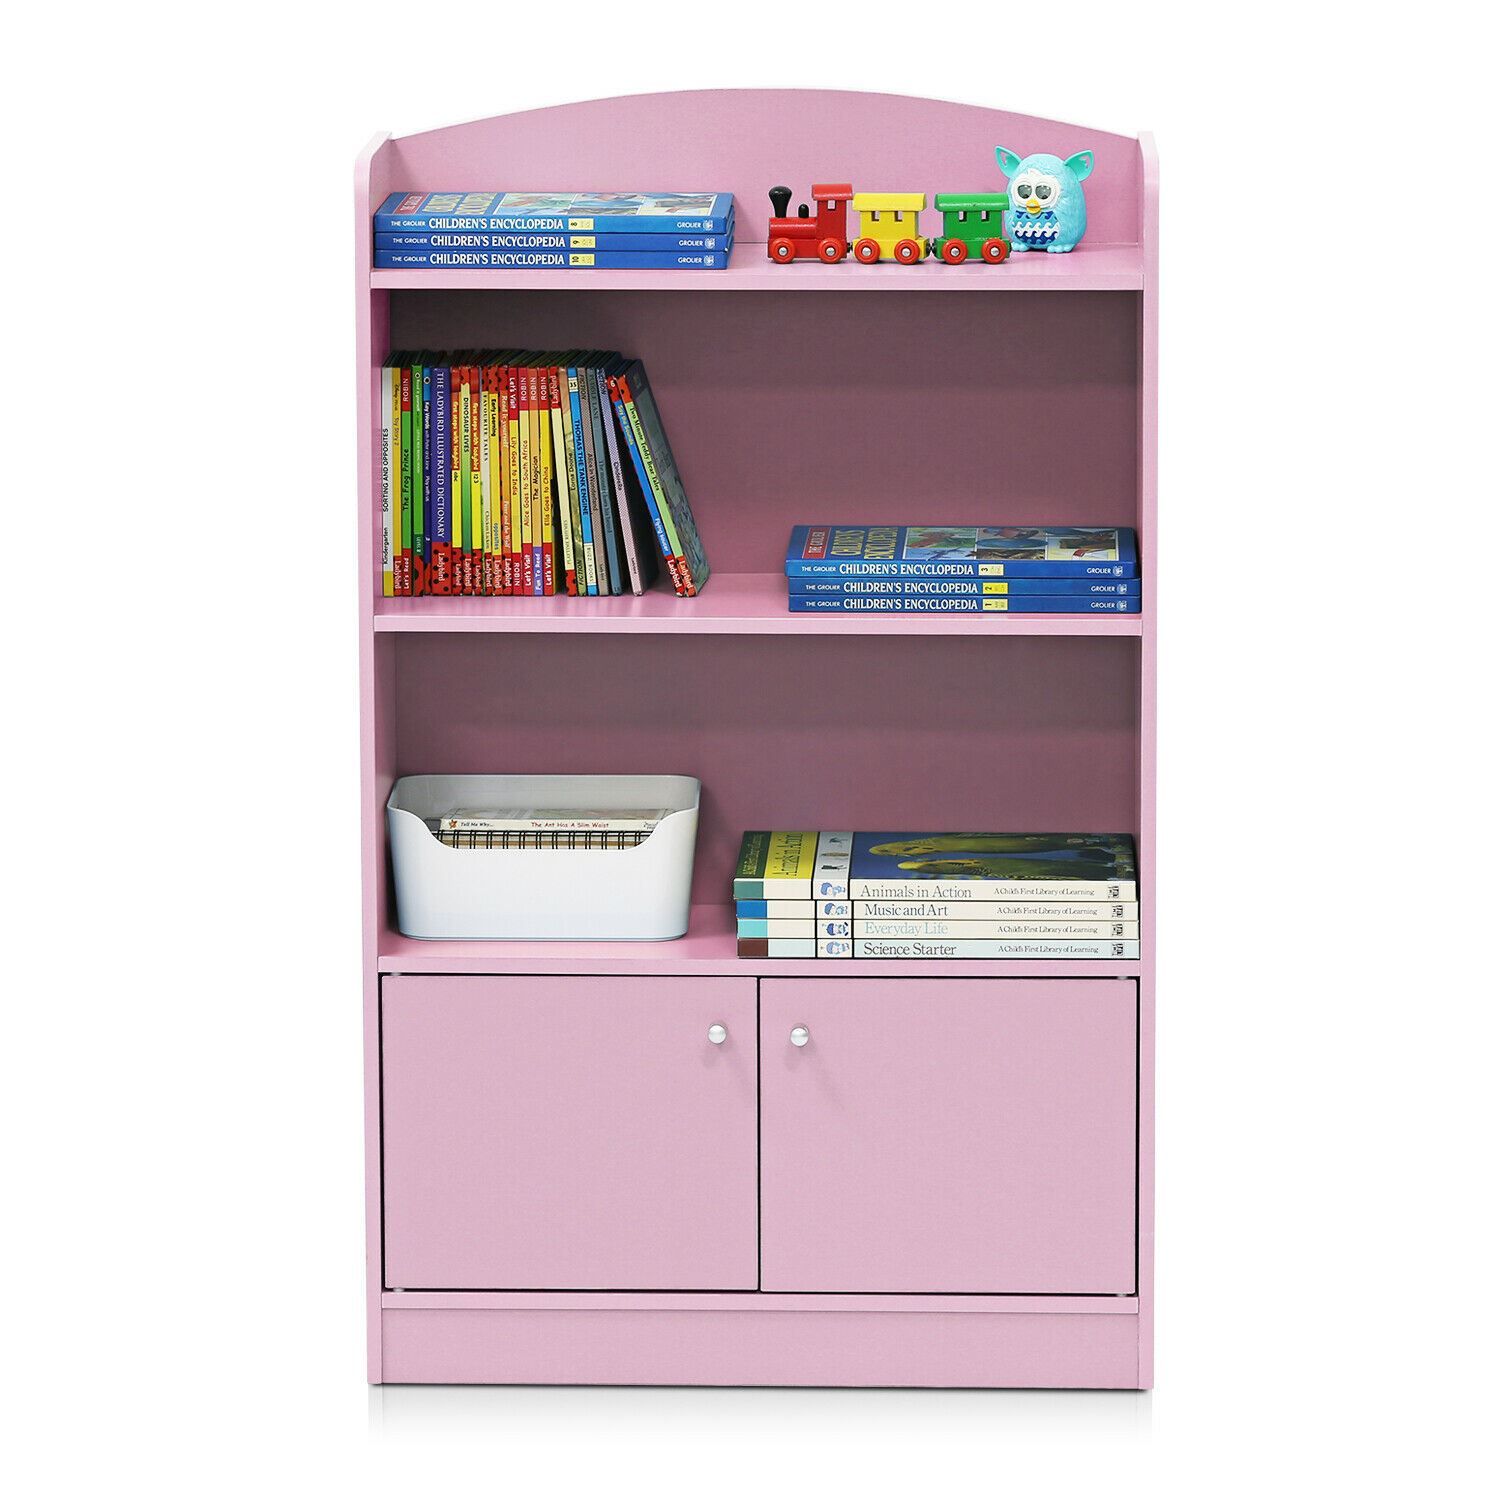 - Furinno KidKanac Bookshelf with Storage Cabinet great addition to any home or office.
- Fill it with favorite reads for a harmonious home library, or set it in the den to show off framed family photos. 
- Easy-clean laminate construction. 
- All the products are produced and packed 100% in Malaysia.